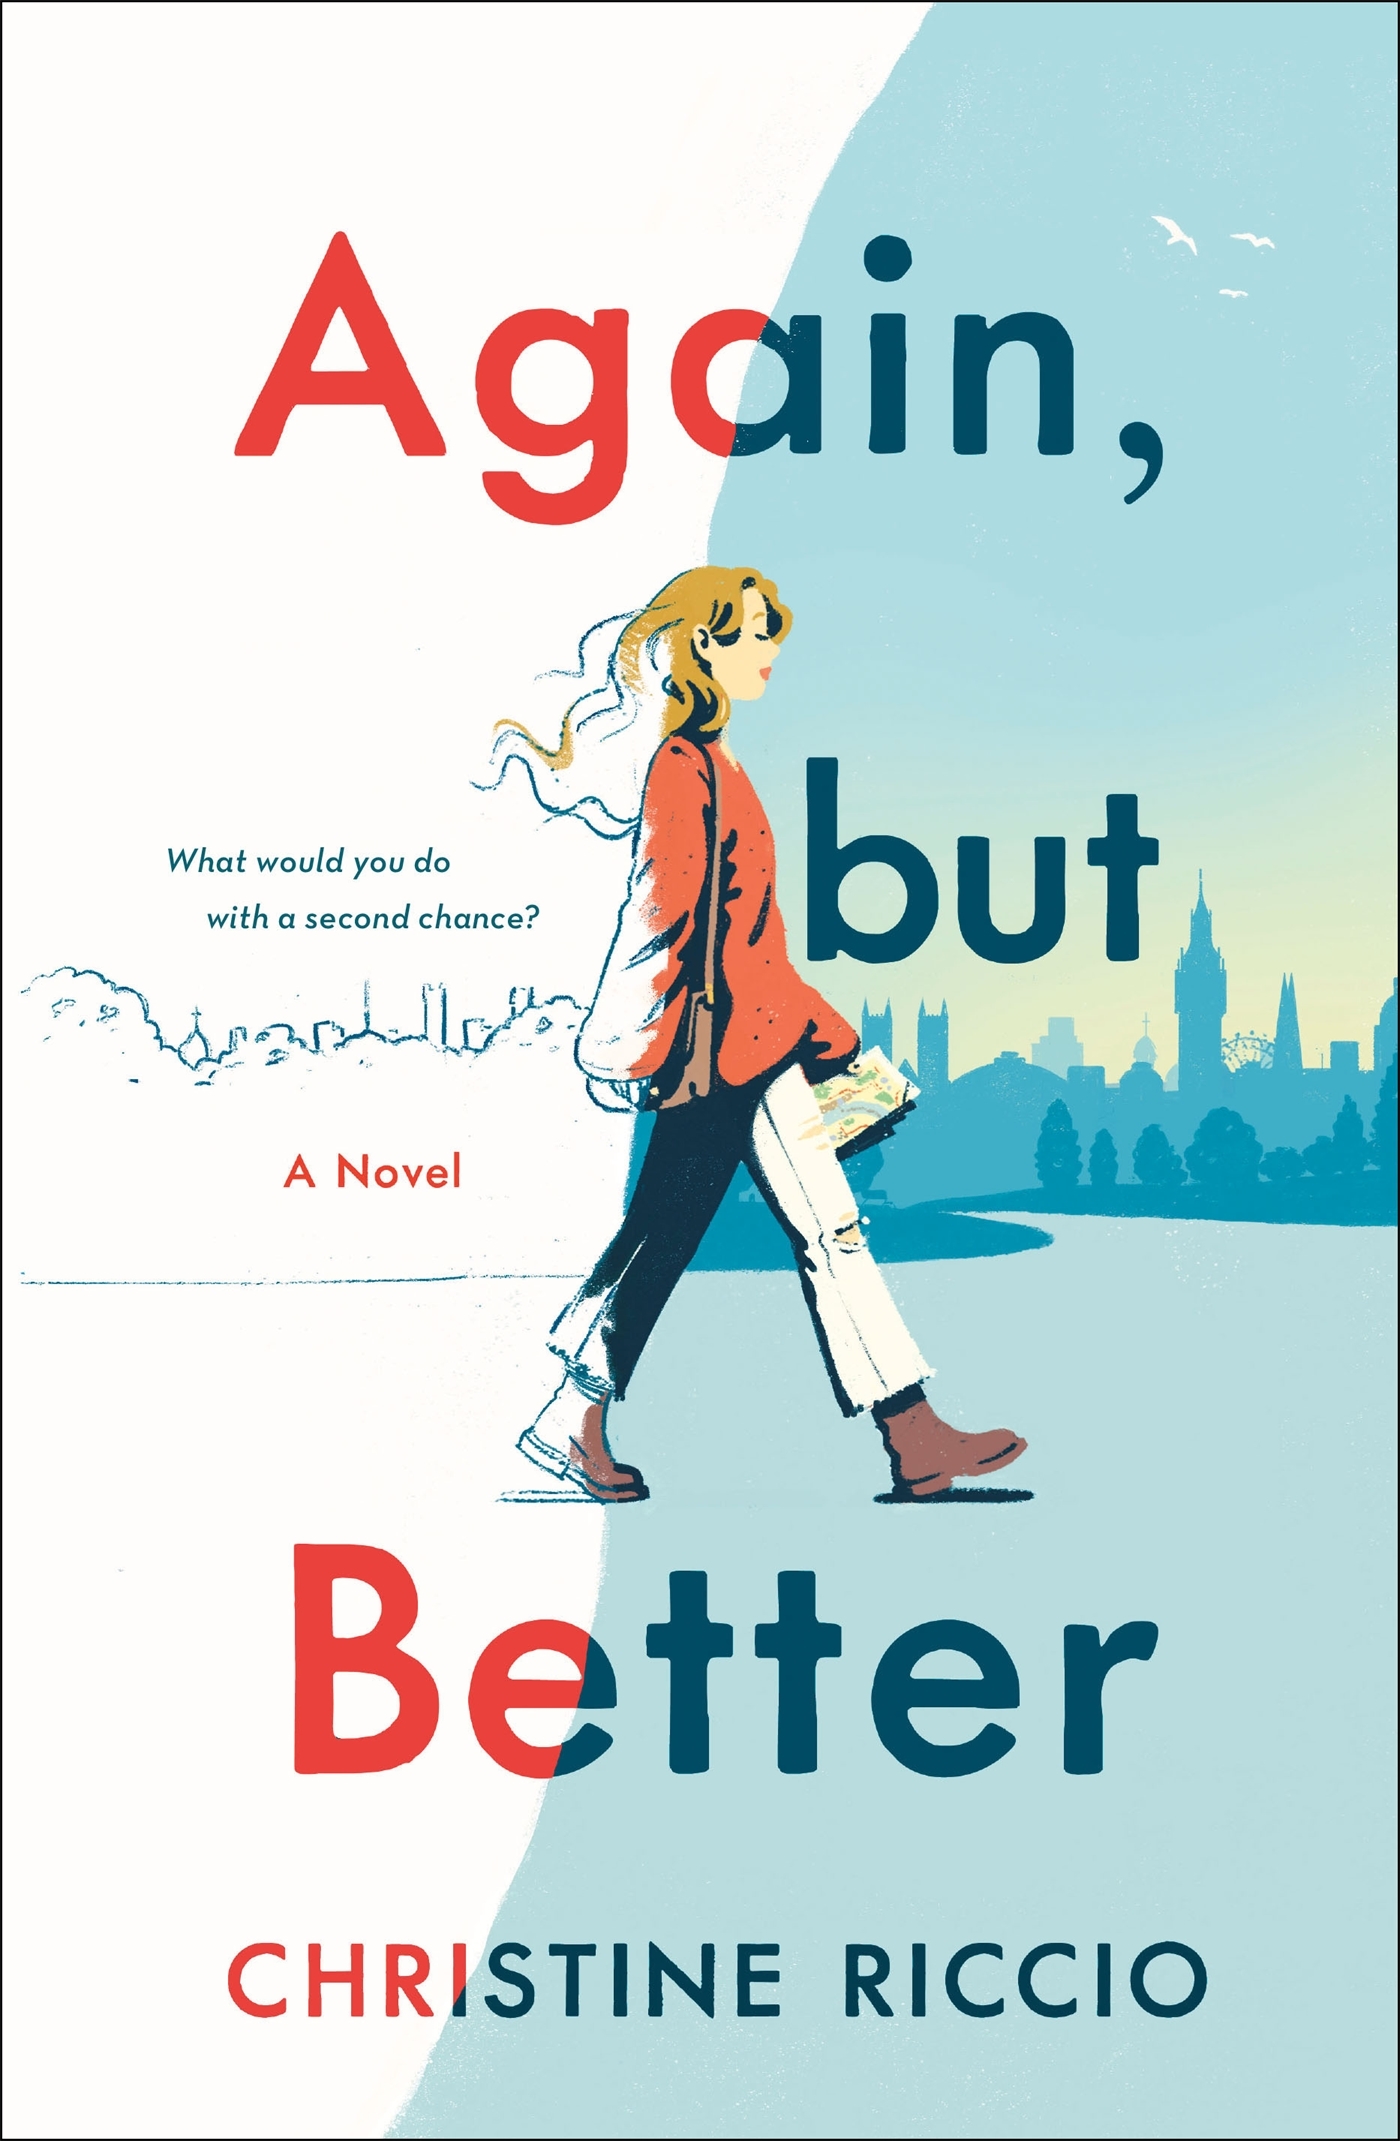 "The cover of Again, but Better by Christine Riccio features a stylized illustration of a young woman in a red jacket carrying a book, walking purposefully with a city skyline in the background. The background shifts from white to light blue, conveying a sense of movement and transition."